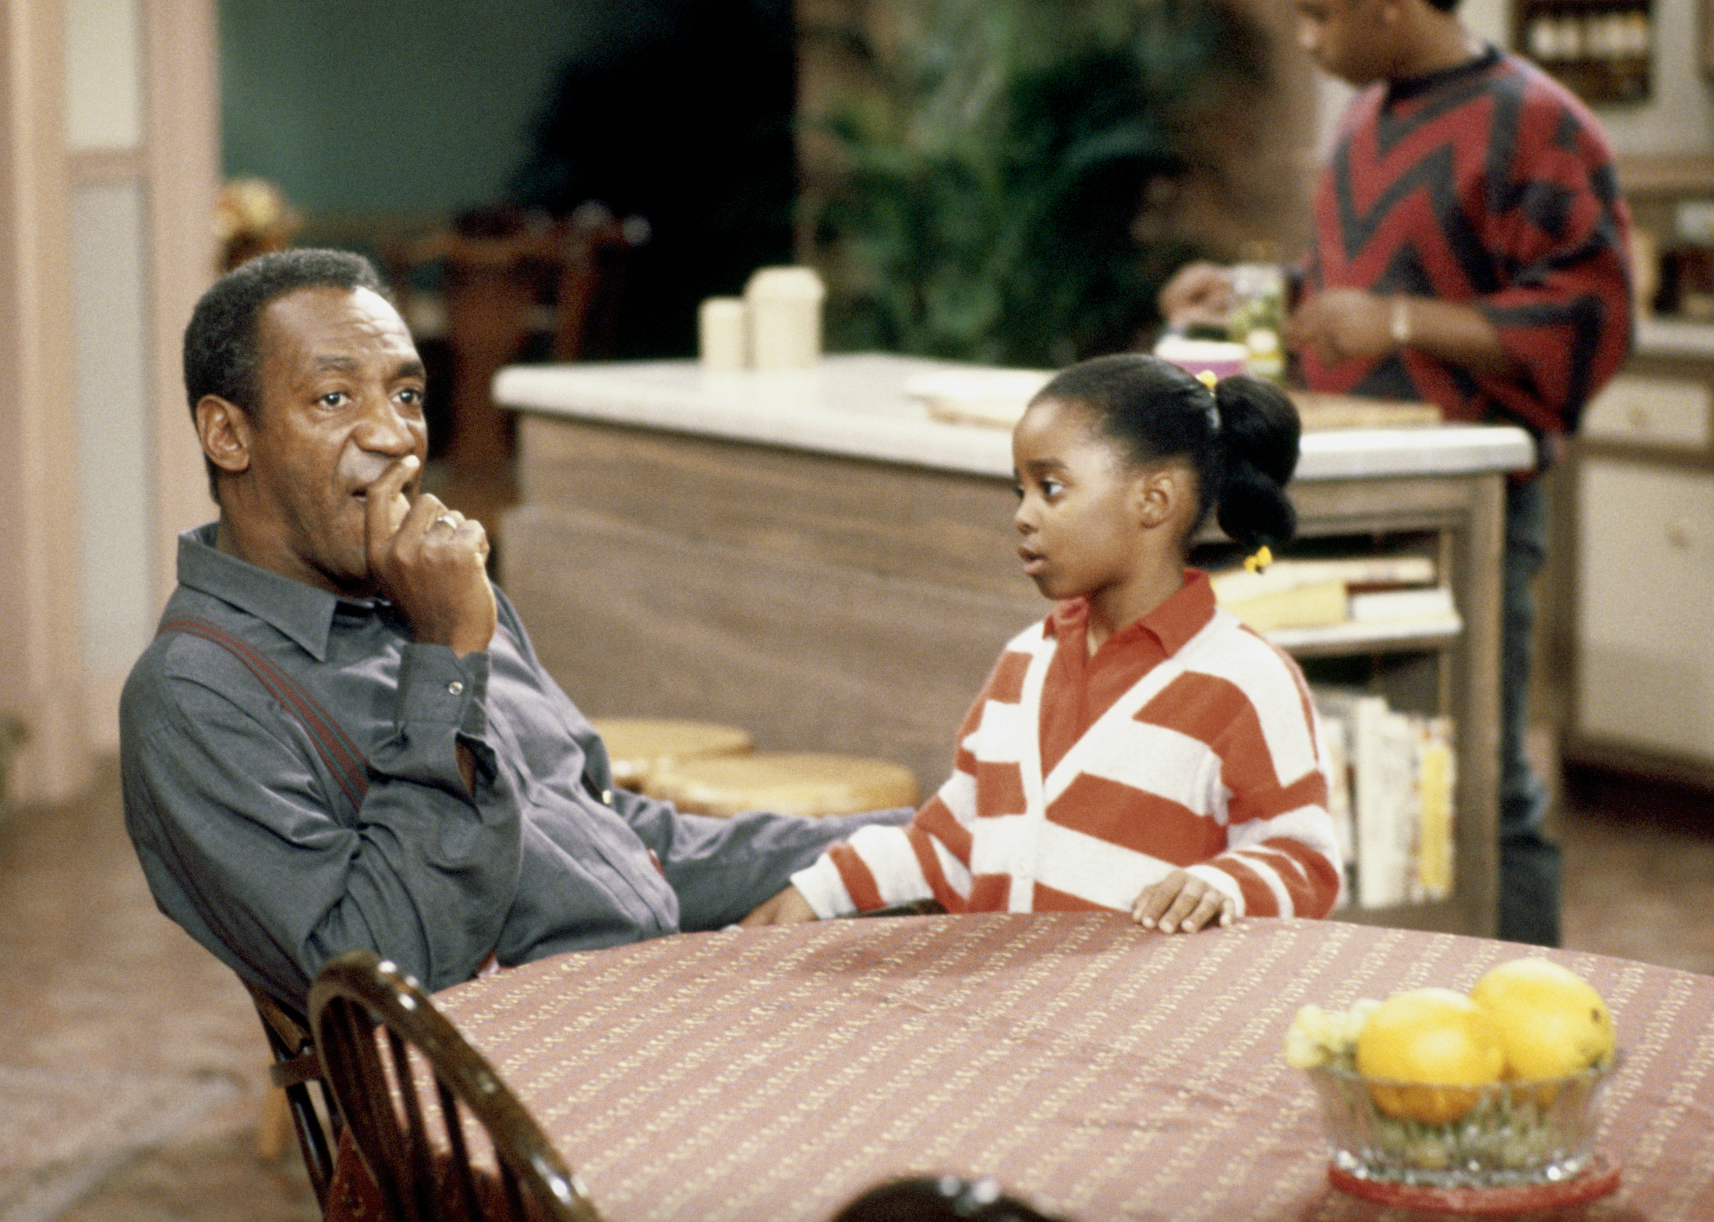 Bill Cosby and Keshia Knight Pulliam in "The Cosby Show"